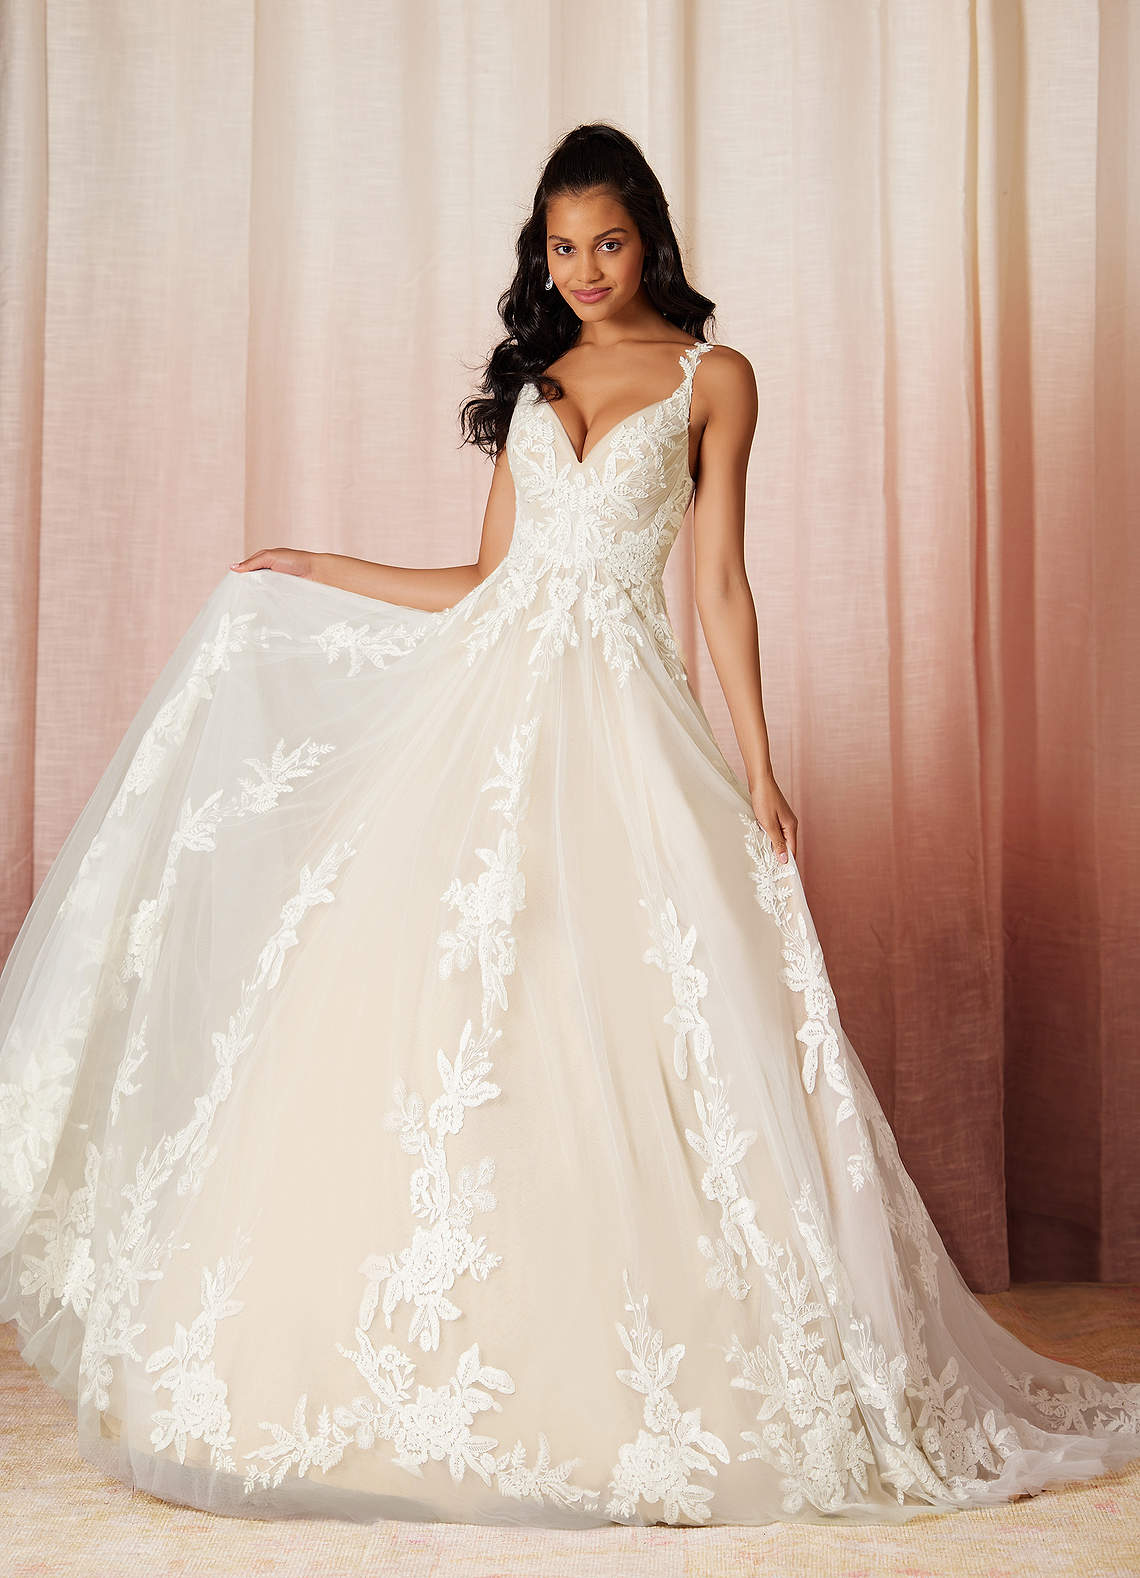 Disney's Collection of Wedding Gowns Includes Tiana, Cinderella and Snow  White